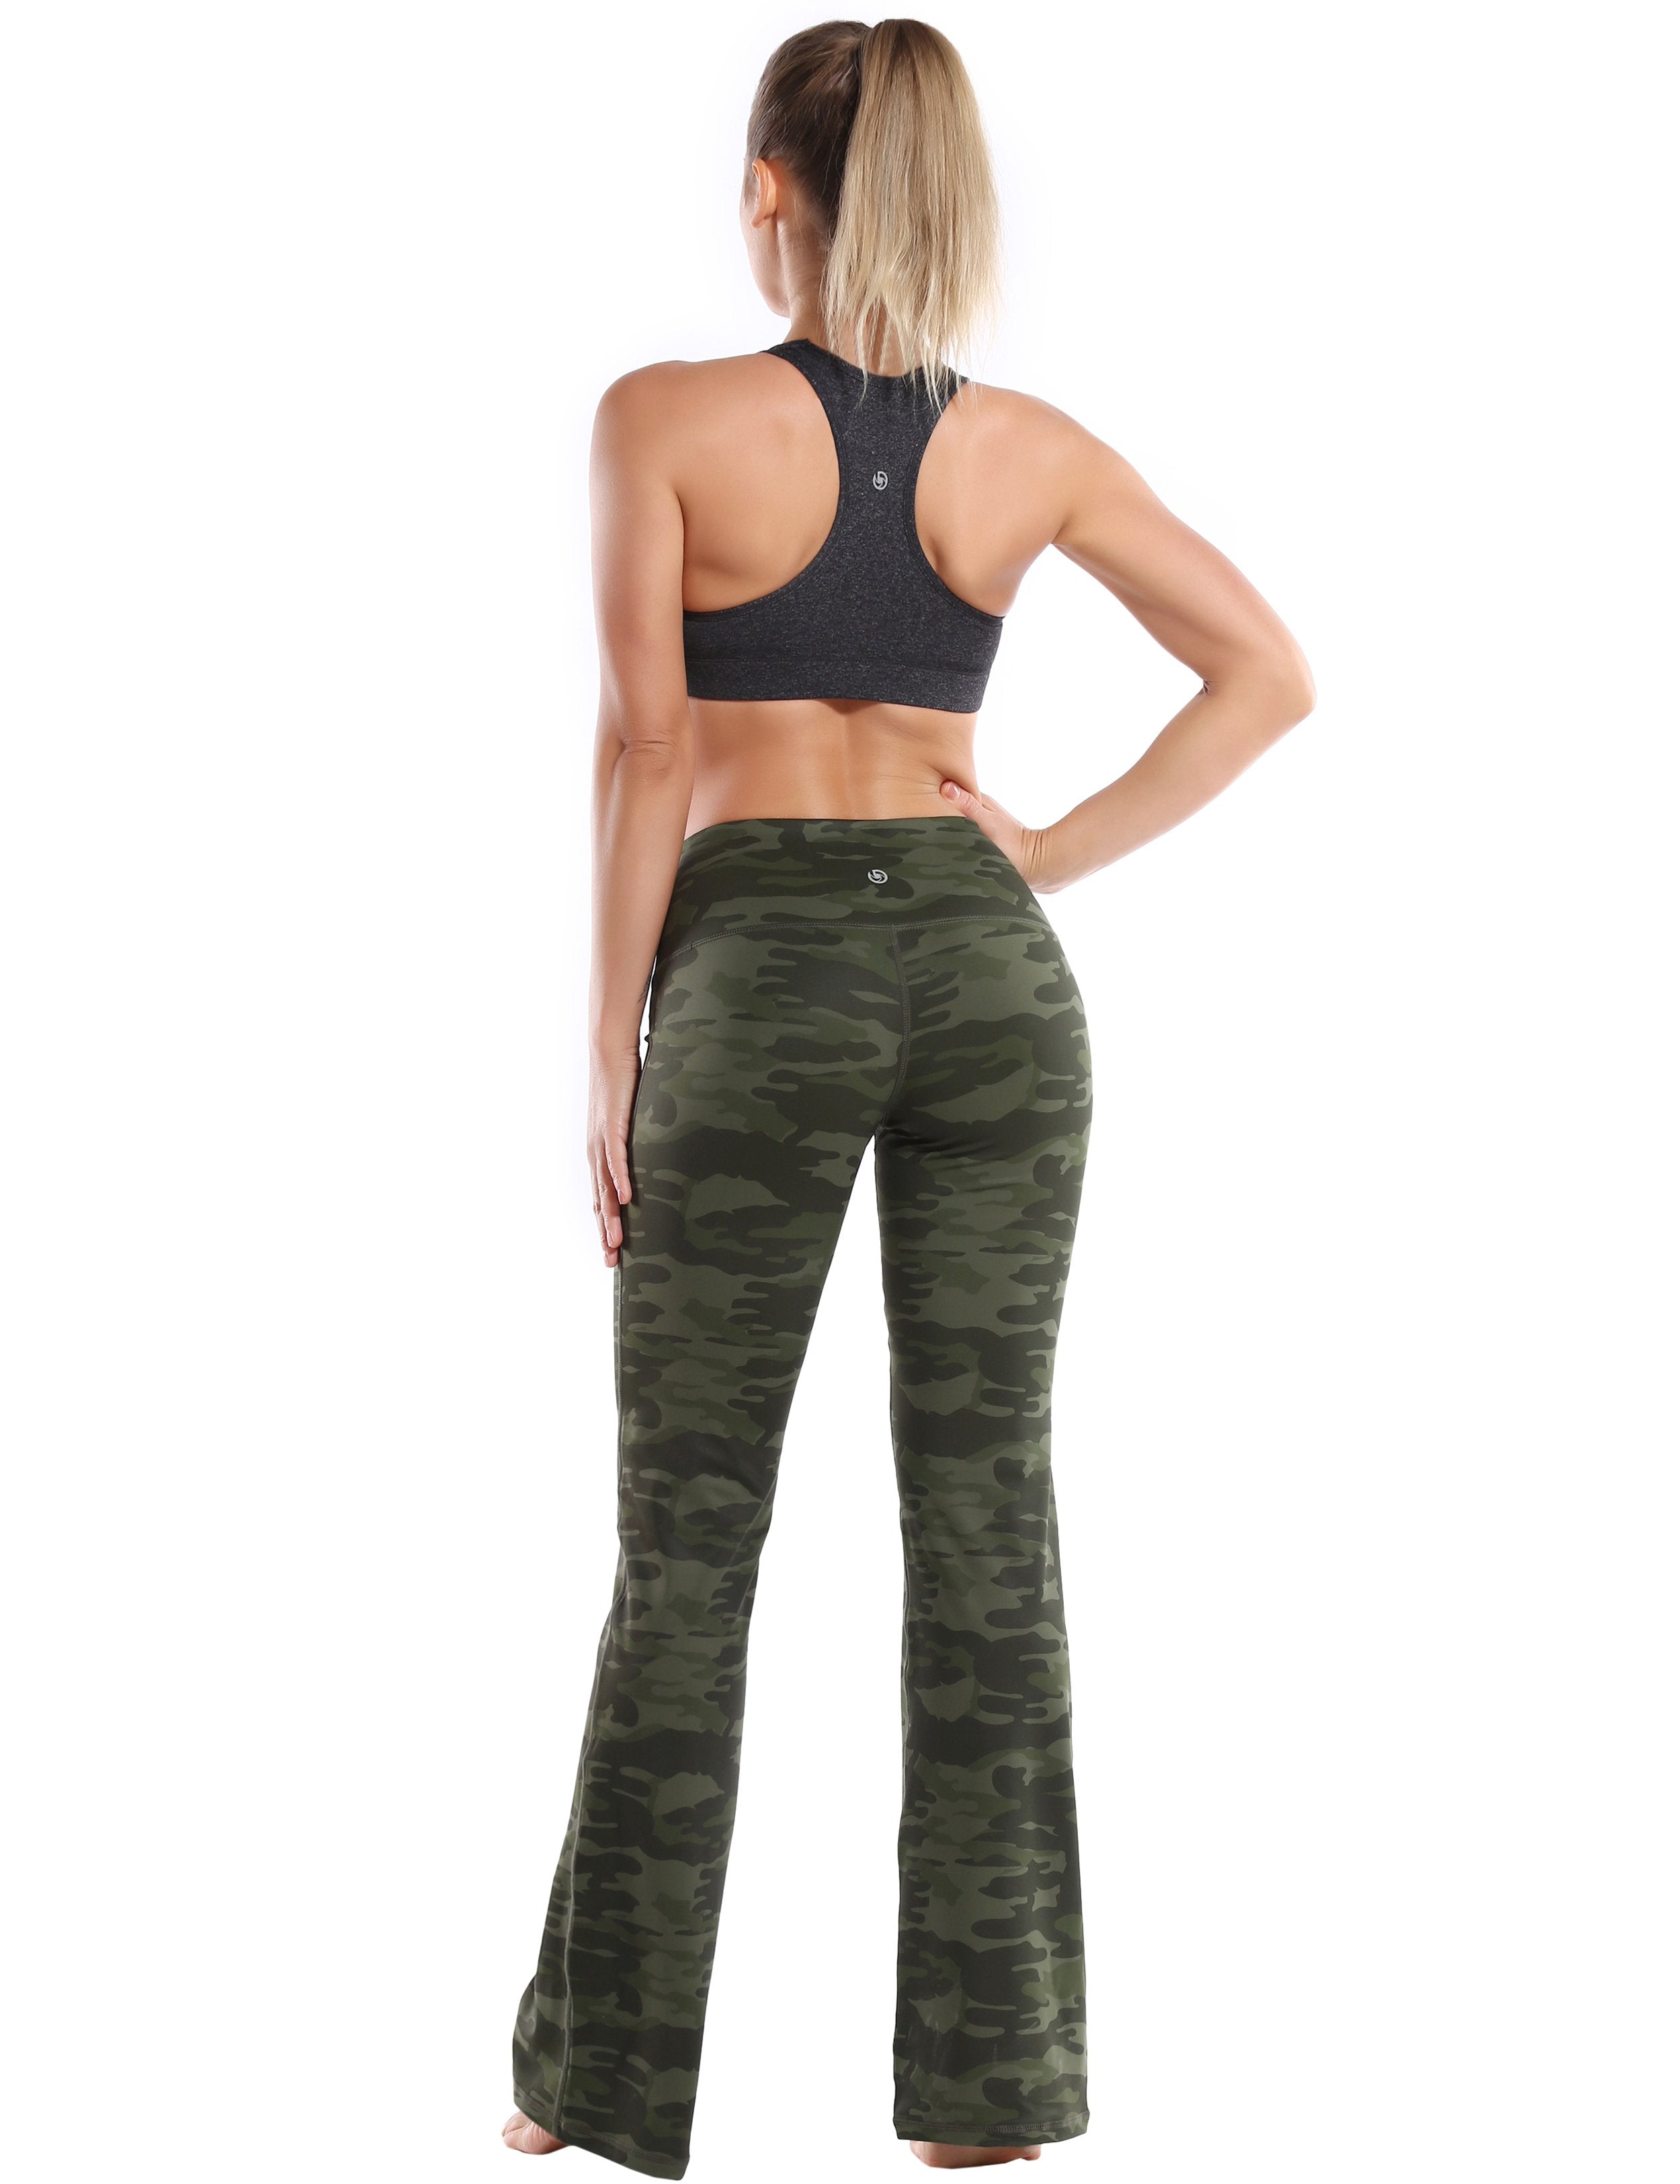 High Waist Printed Bootcut Leggings green camo 78%Polyester/22%Spandex Fabric doesn't attract lint easily 4-way stretch No see-through Moisture-wicking Tummy control Inner pocket Five lengths